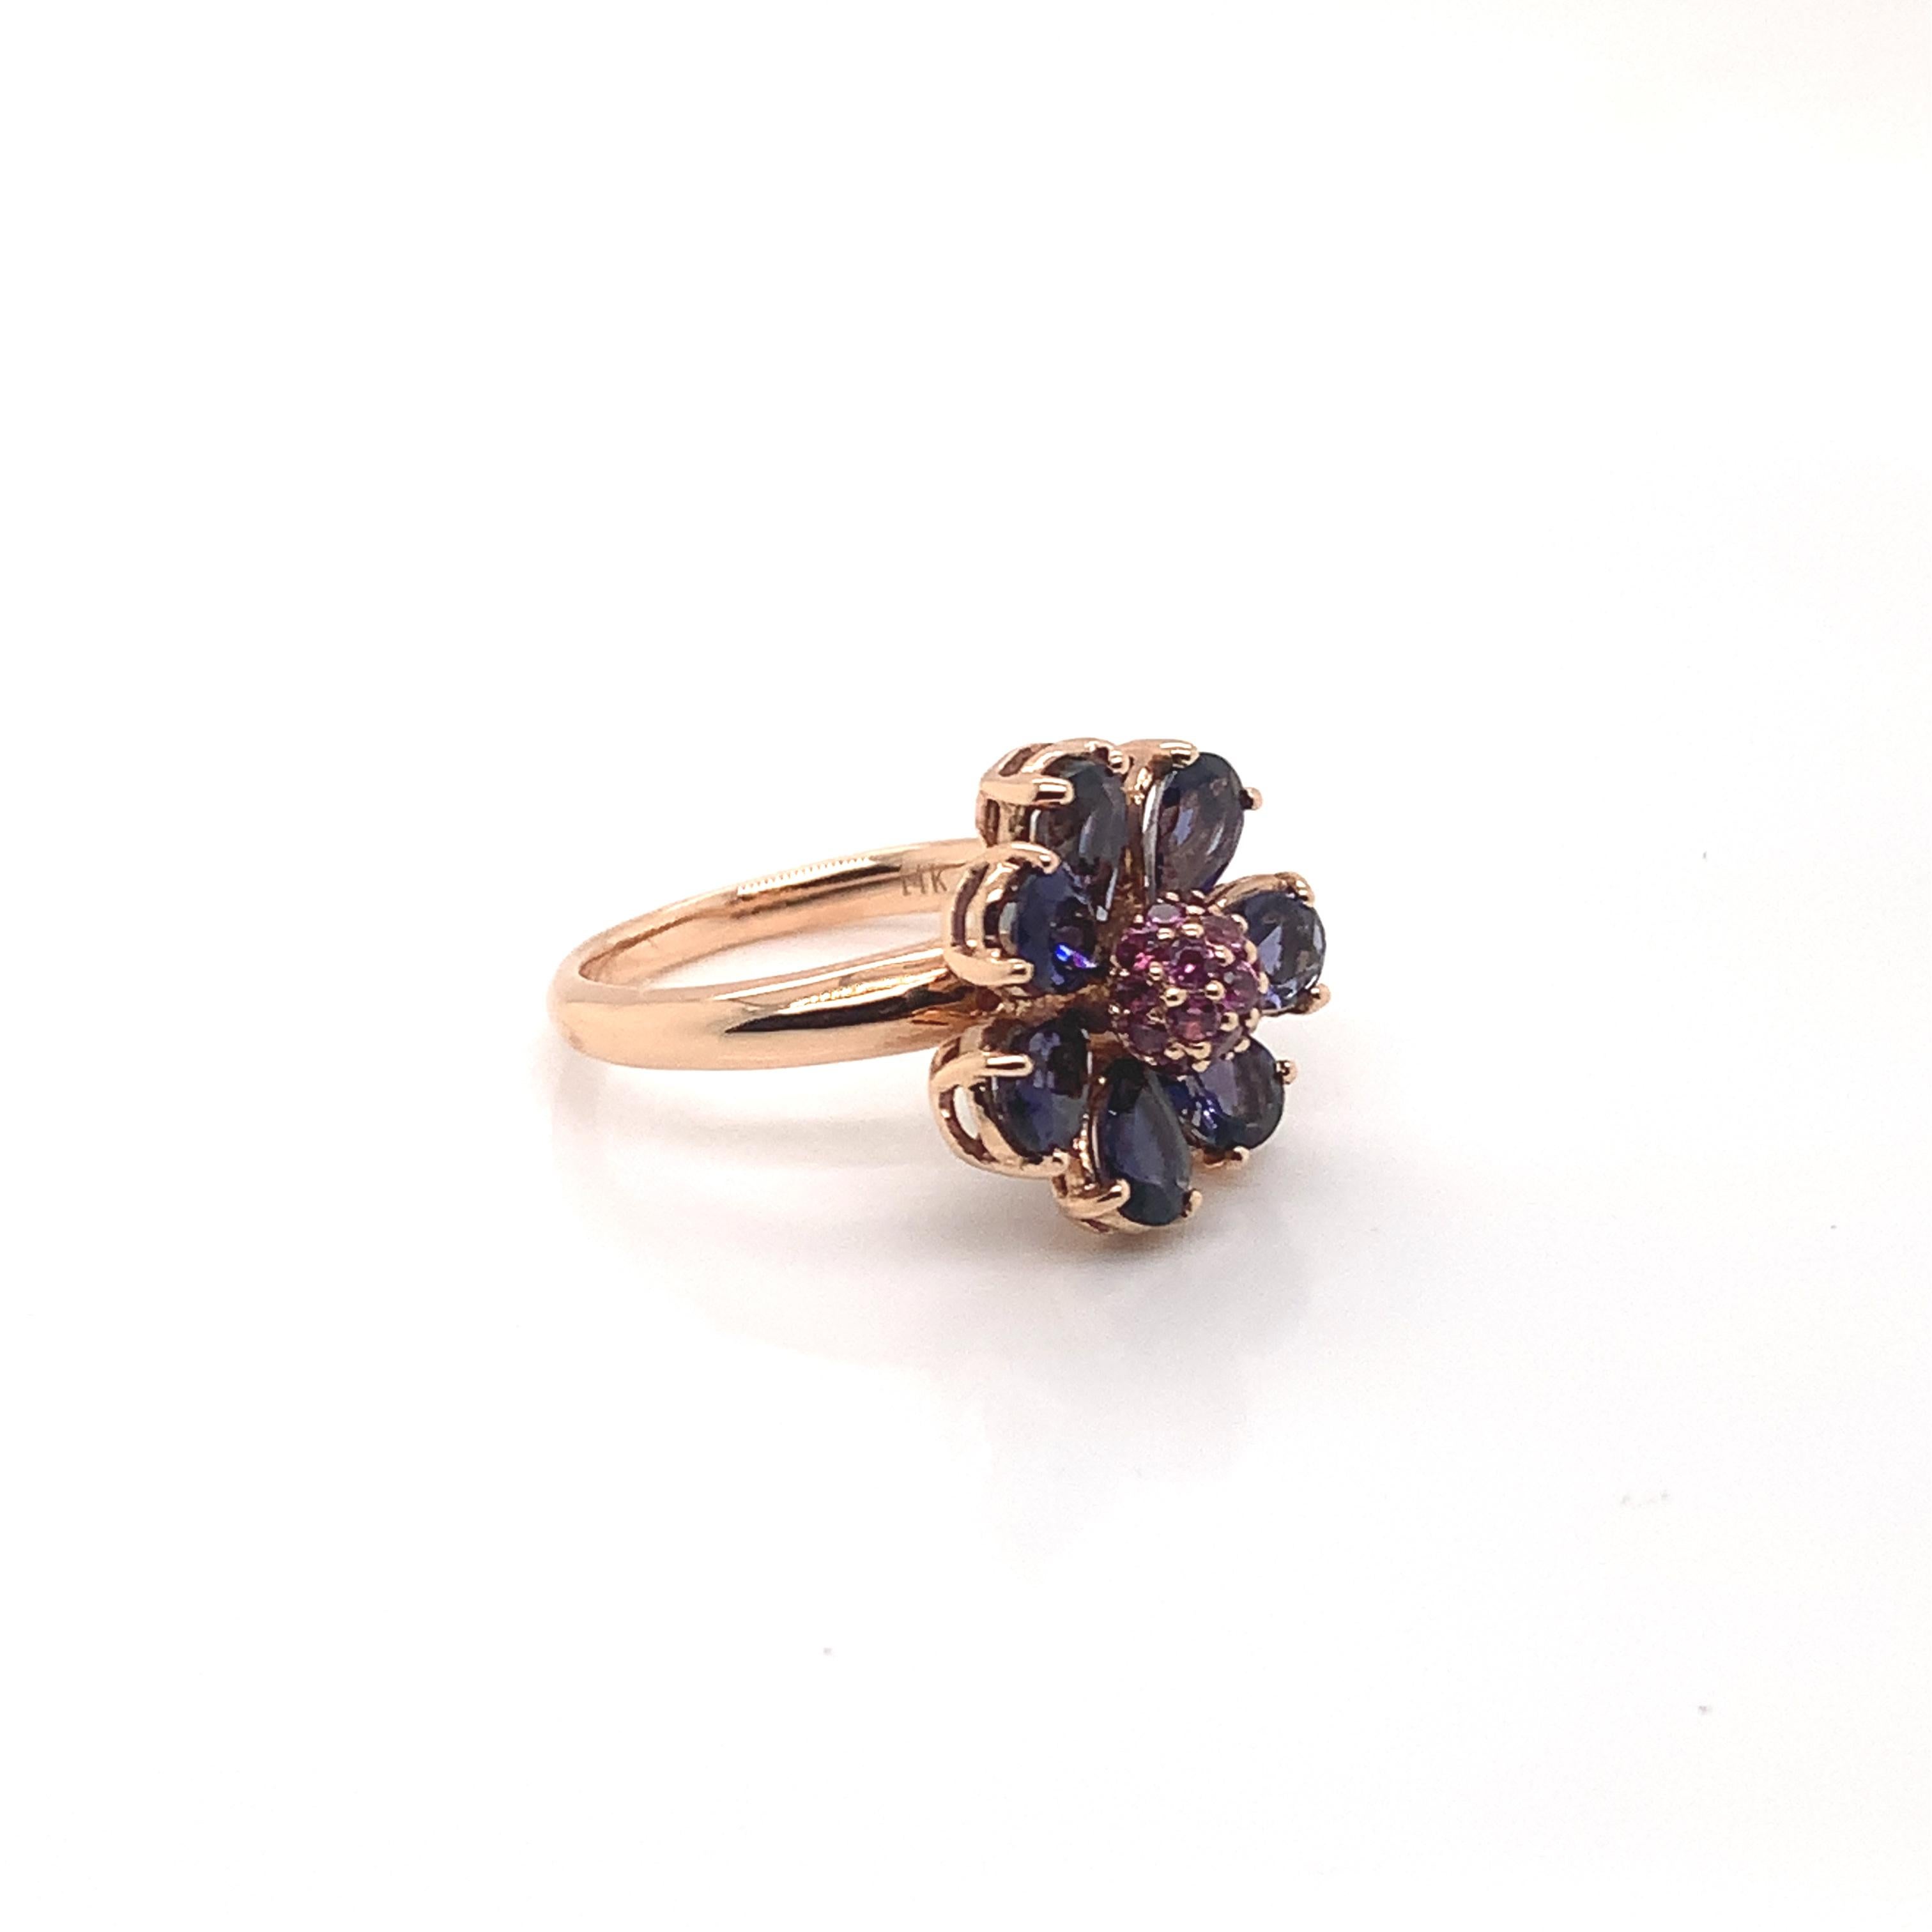 Glamorous Gemstones - Sunita Nahata started off her career as a gemstone trader, and this particular collection reflects her love for multi-colored semi-precious gemstones. This ring presents a floral iolite set around a cluster of rhodolite